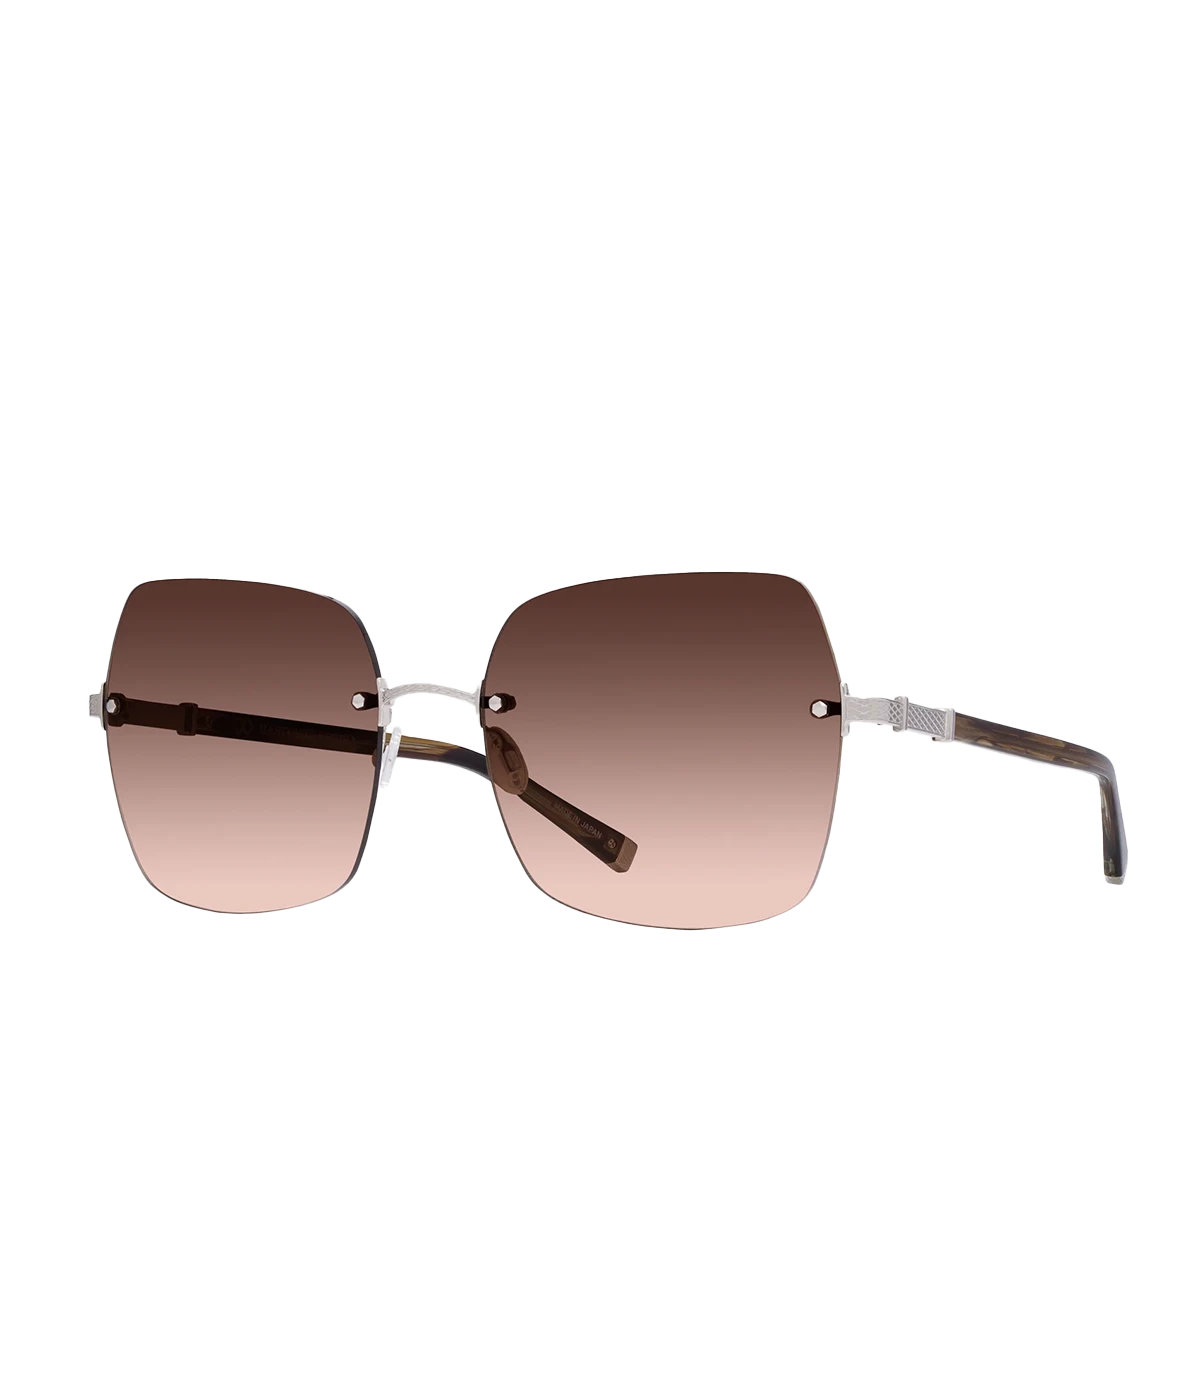 Angie Sunglasses in Tortoise, Silver & Whiskey